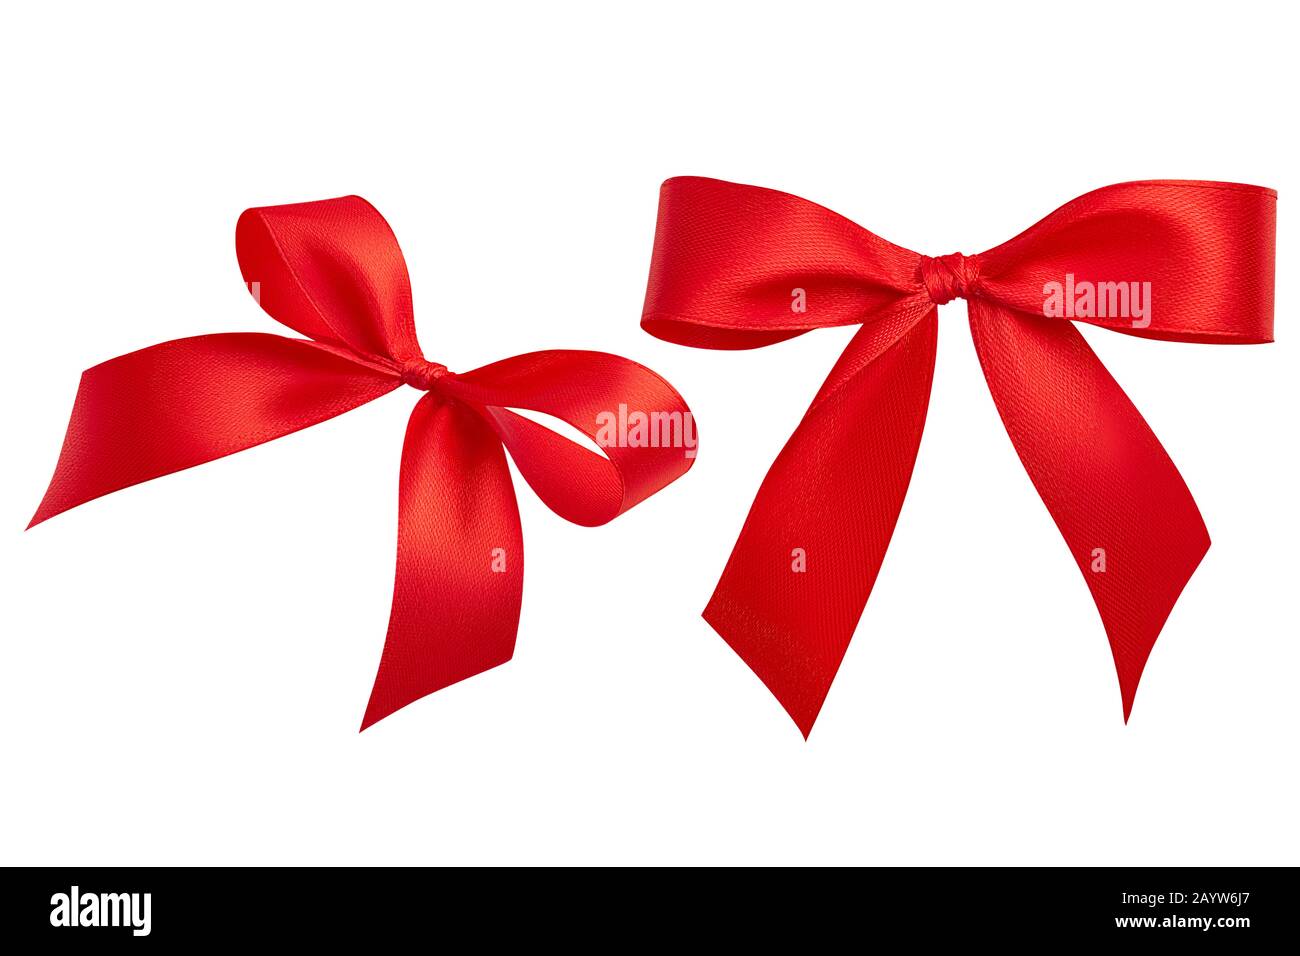 A closeup set of two detailed simple bright red handmade bows from